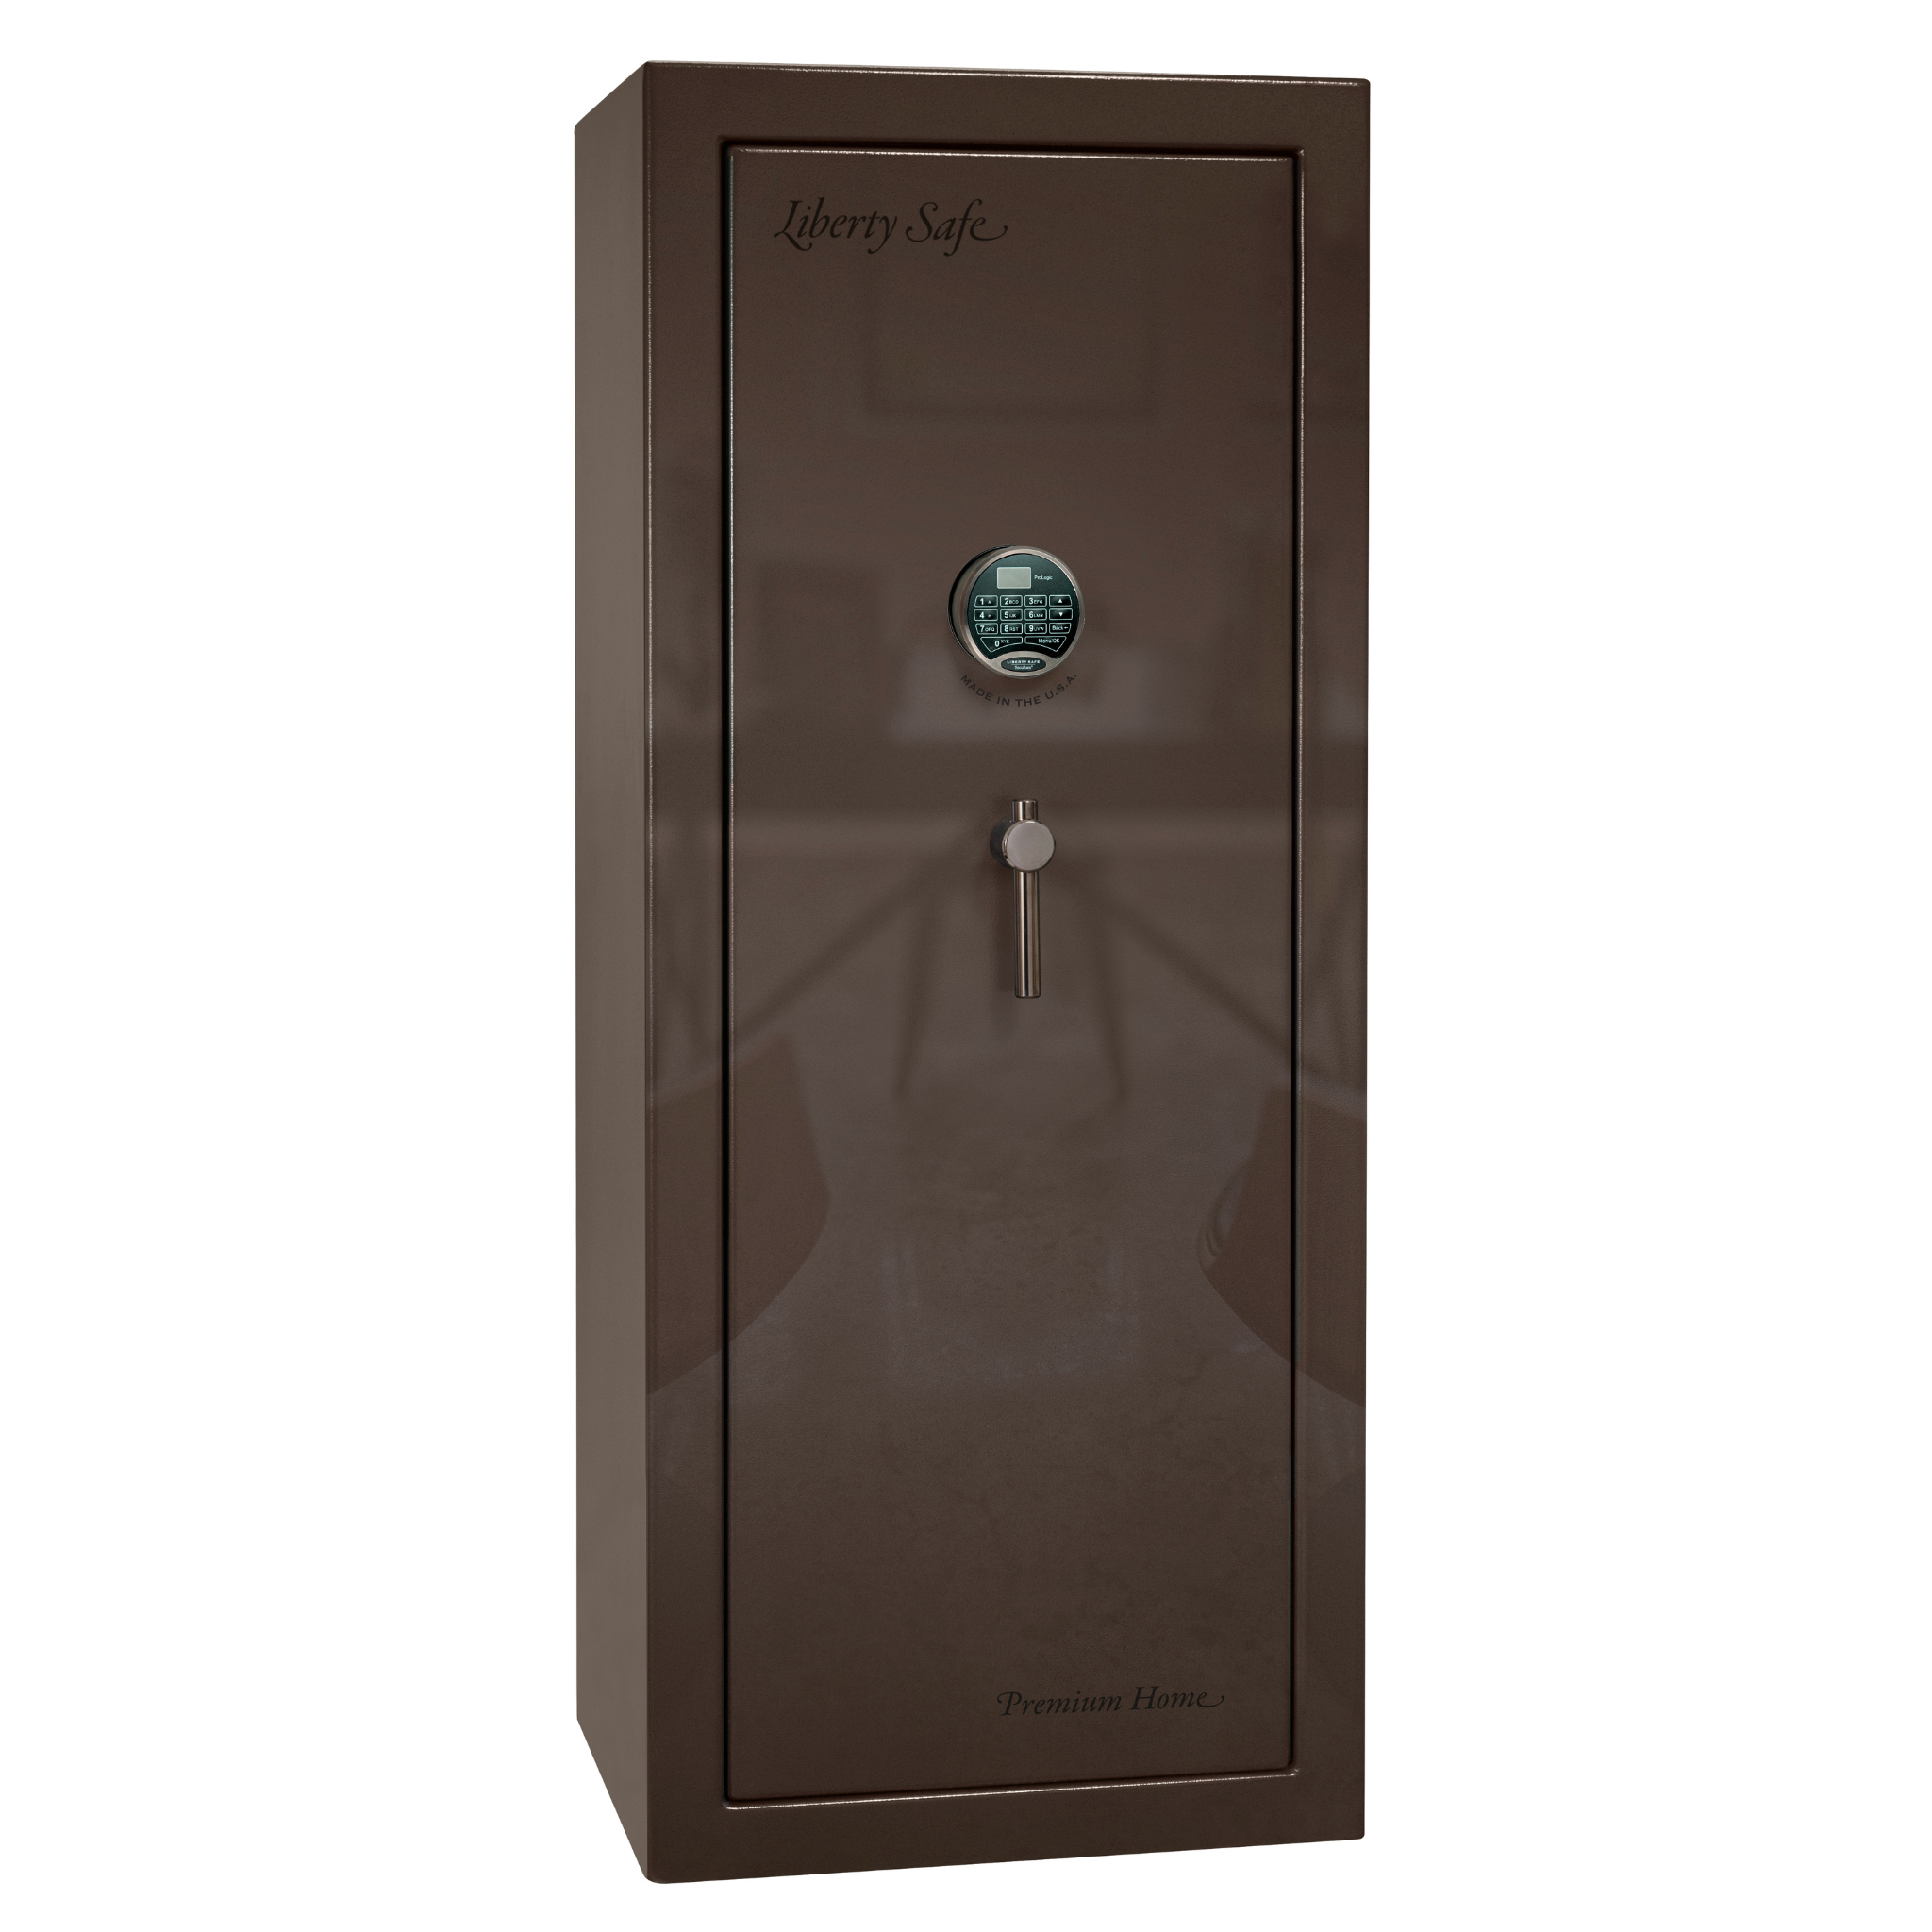 Premium Home Series | Level 7 Security | 2 Hour Fire Protection | 17 | Dimensions: 60.25"(H) x 24.5"(W) x 19"(D) | Bronze Gloss - Closed Door